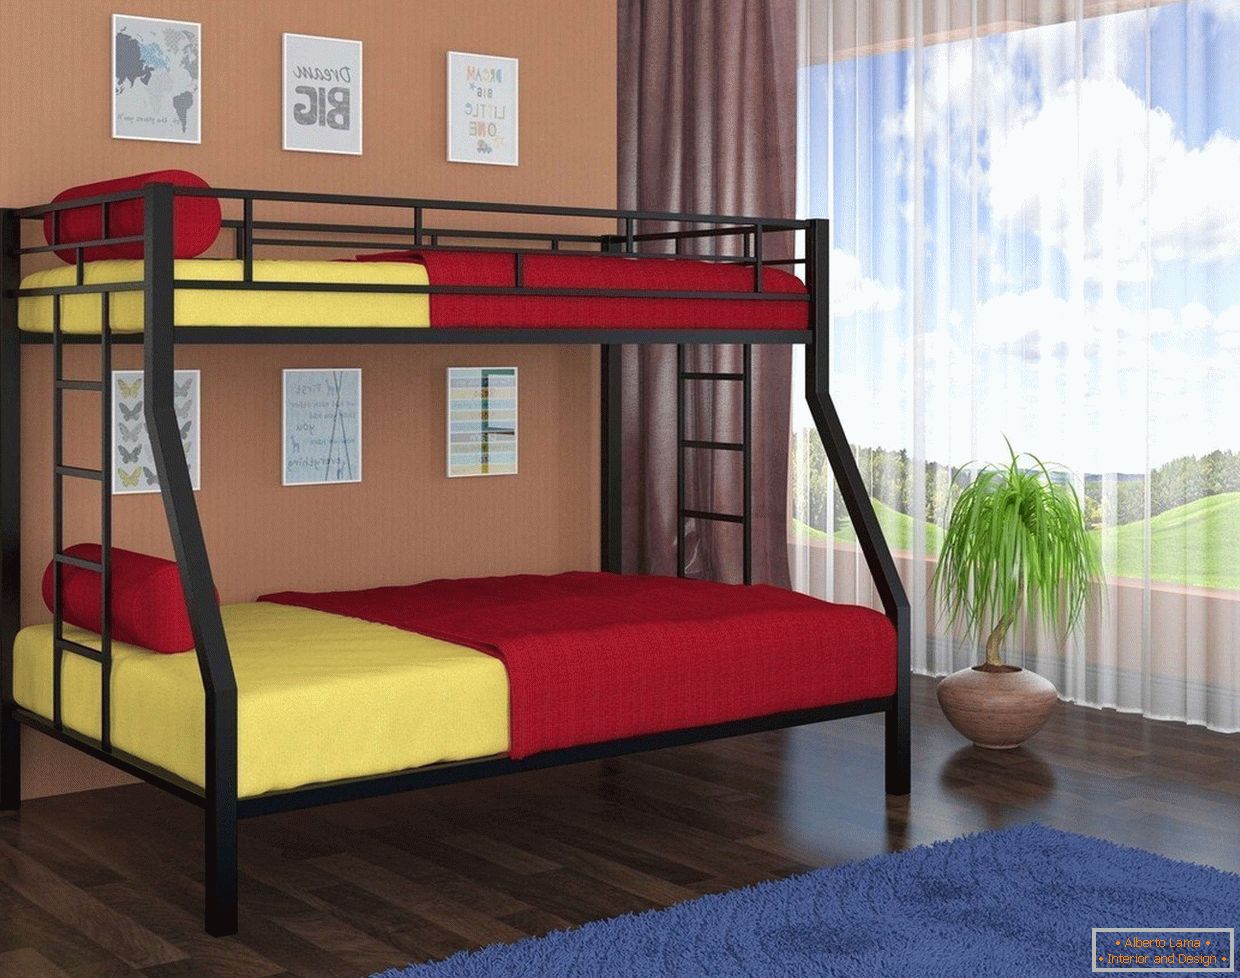 Yellow and red bed linen in a bunk bed